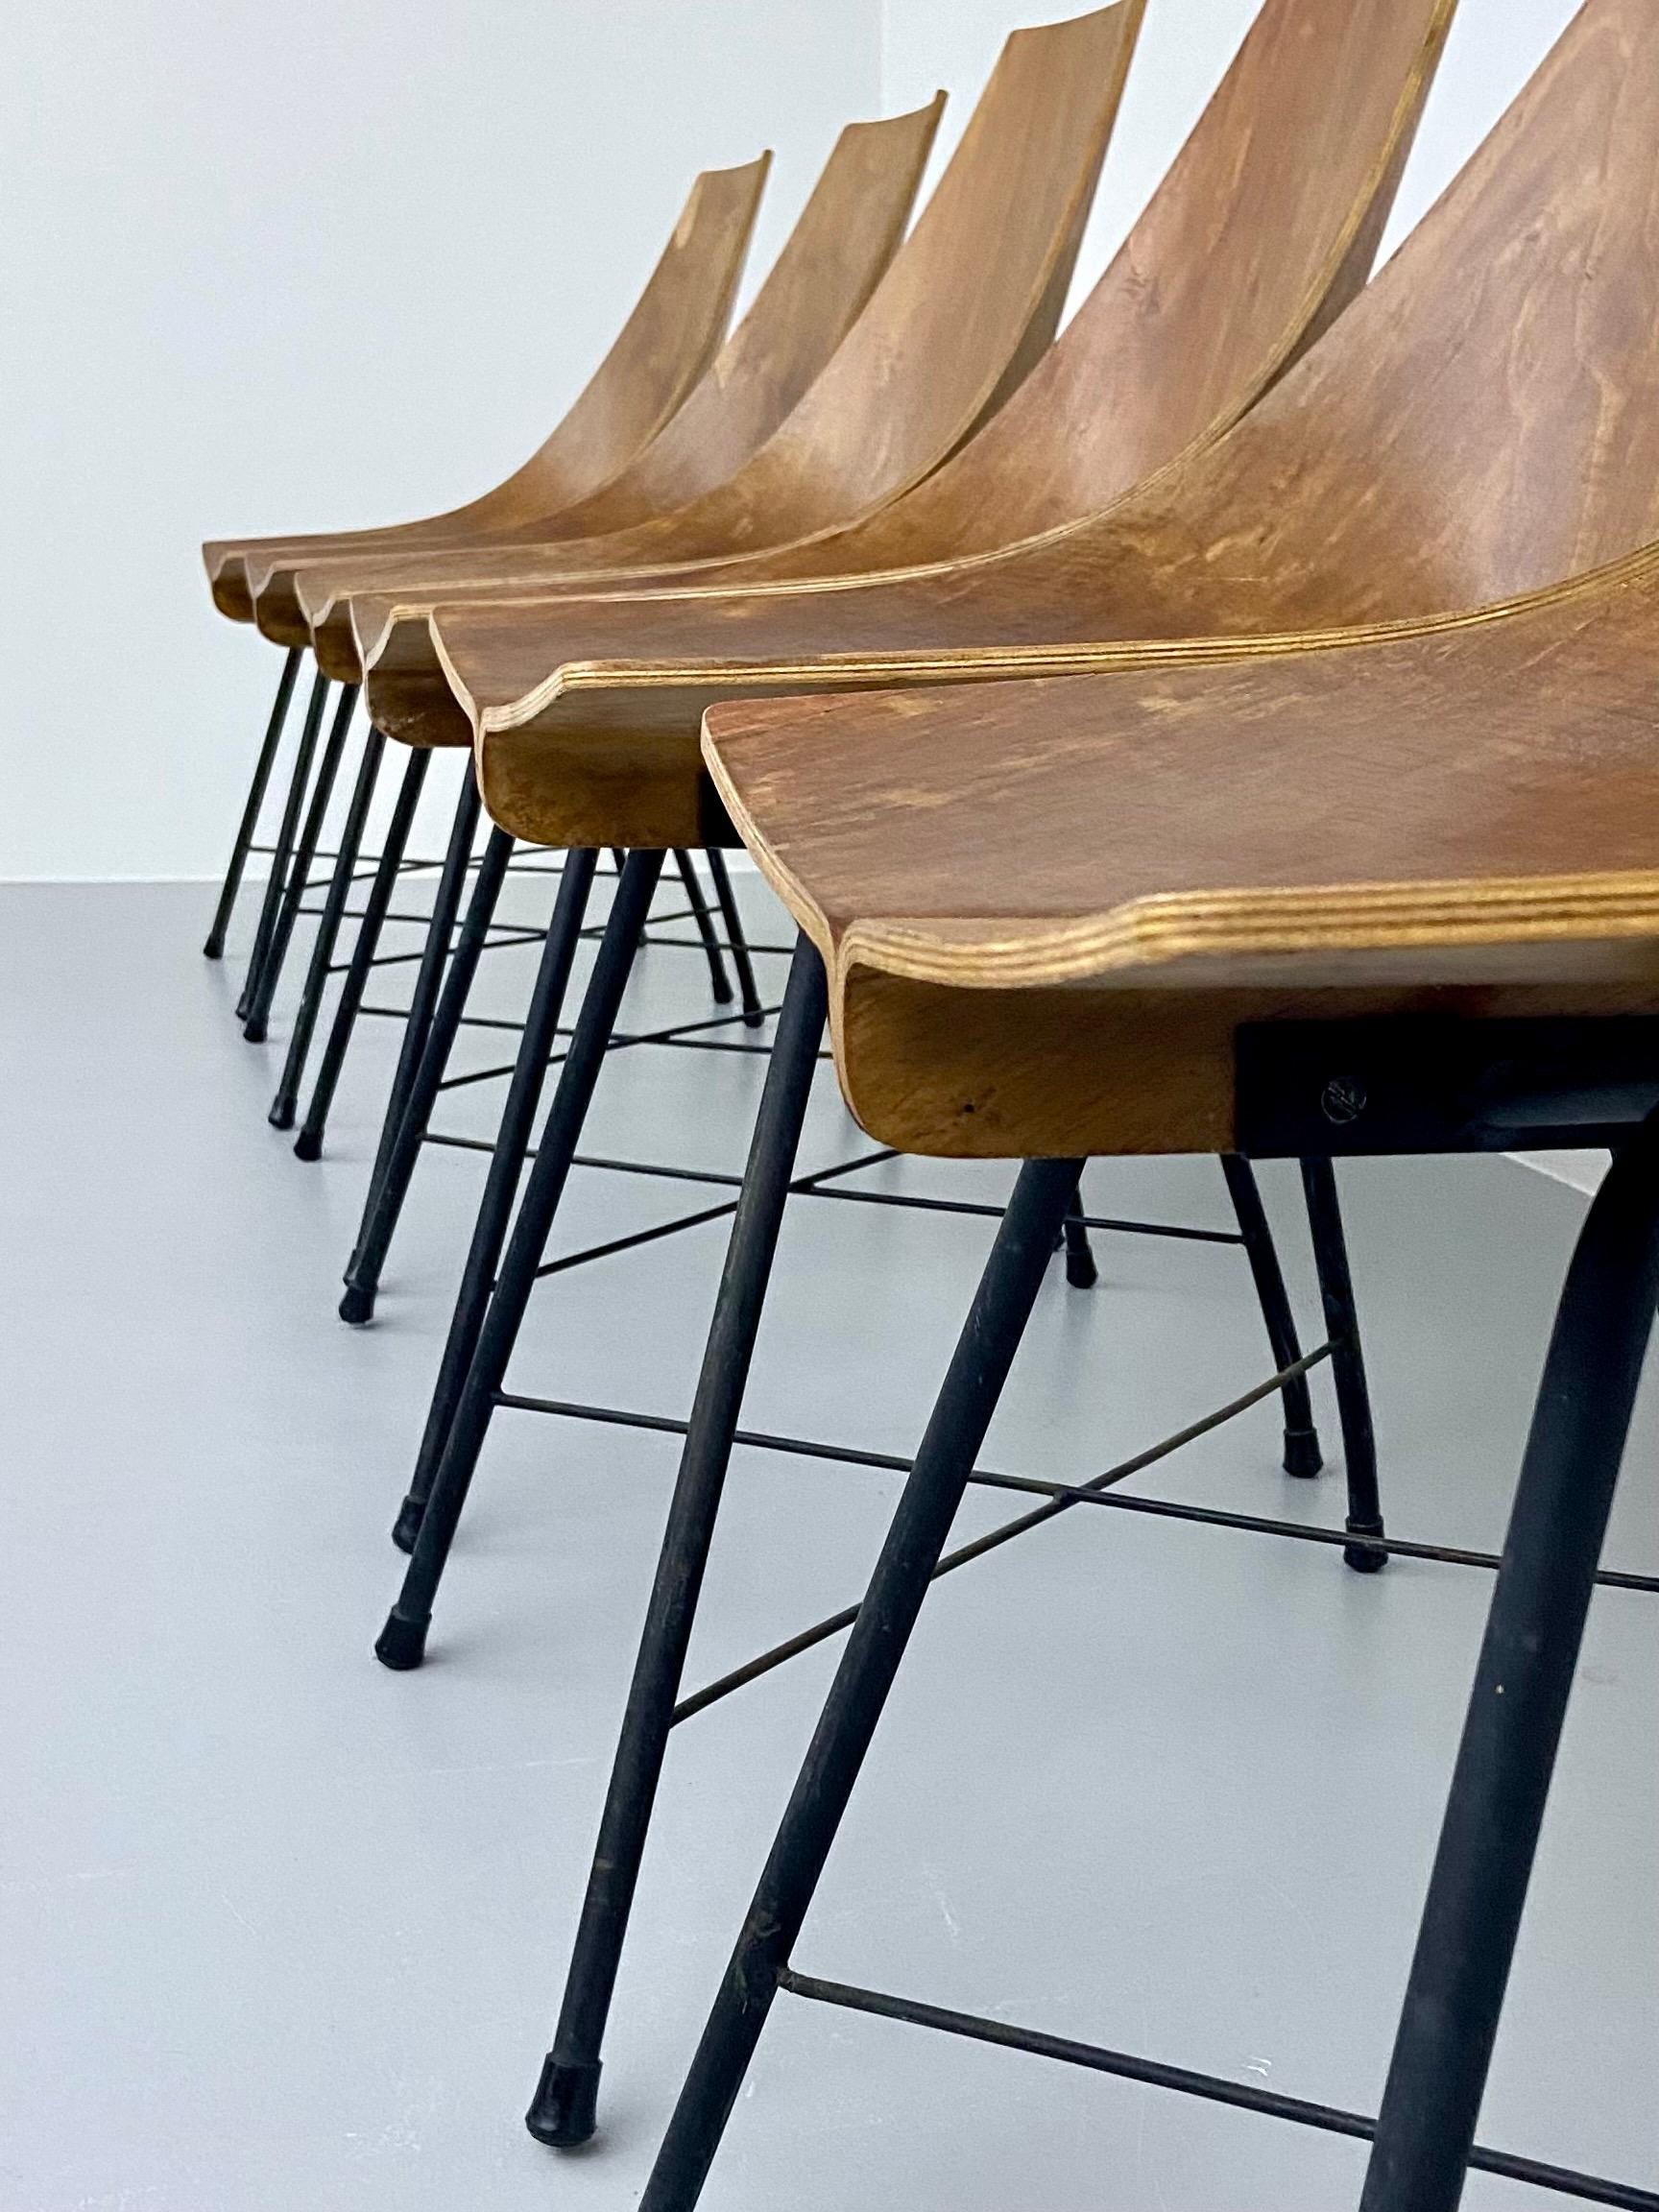 Set of 6 Dining Room Chairs by Carlo Ratti in Bended Wood and Metal, Italy, 1954 In Good Condition For Sale In Amsterdam, NL